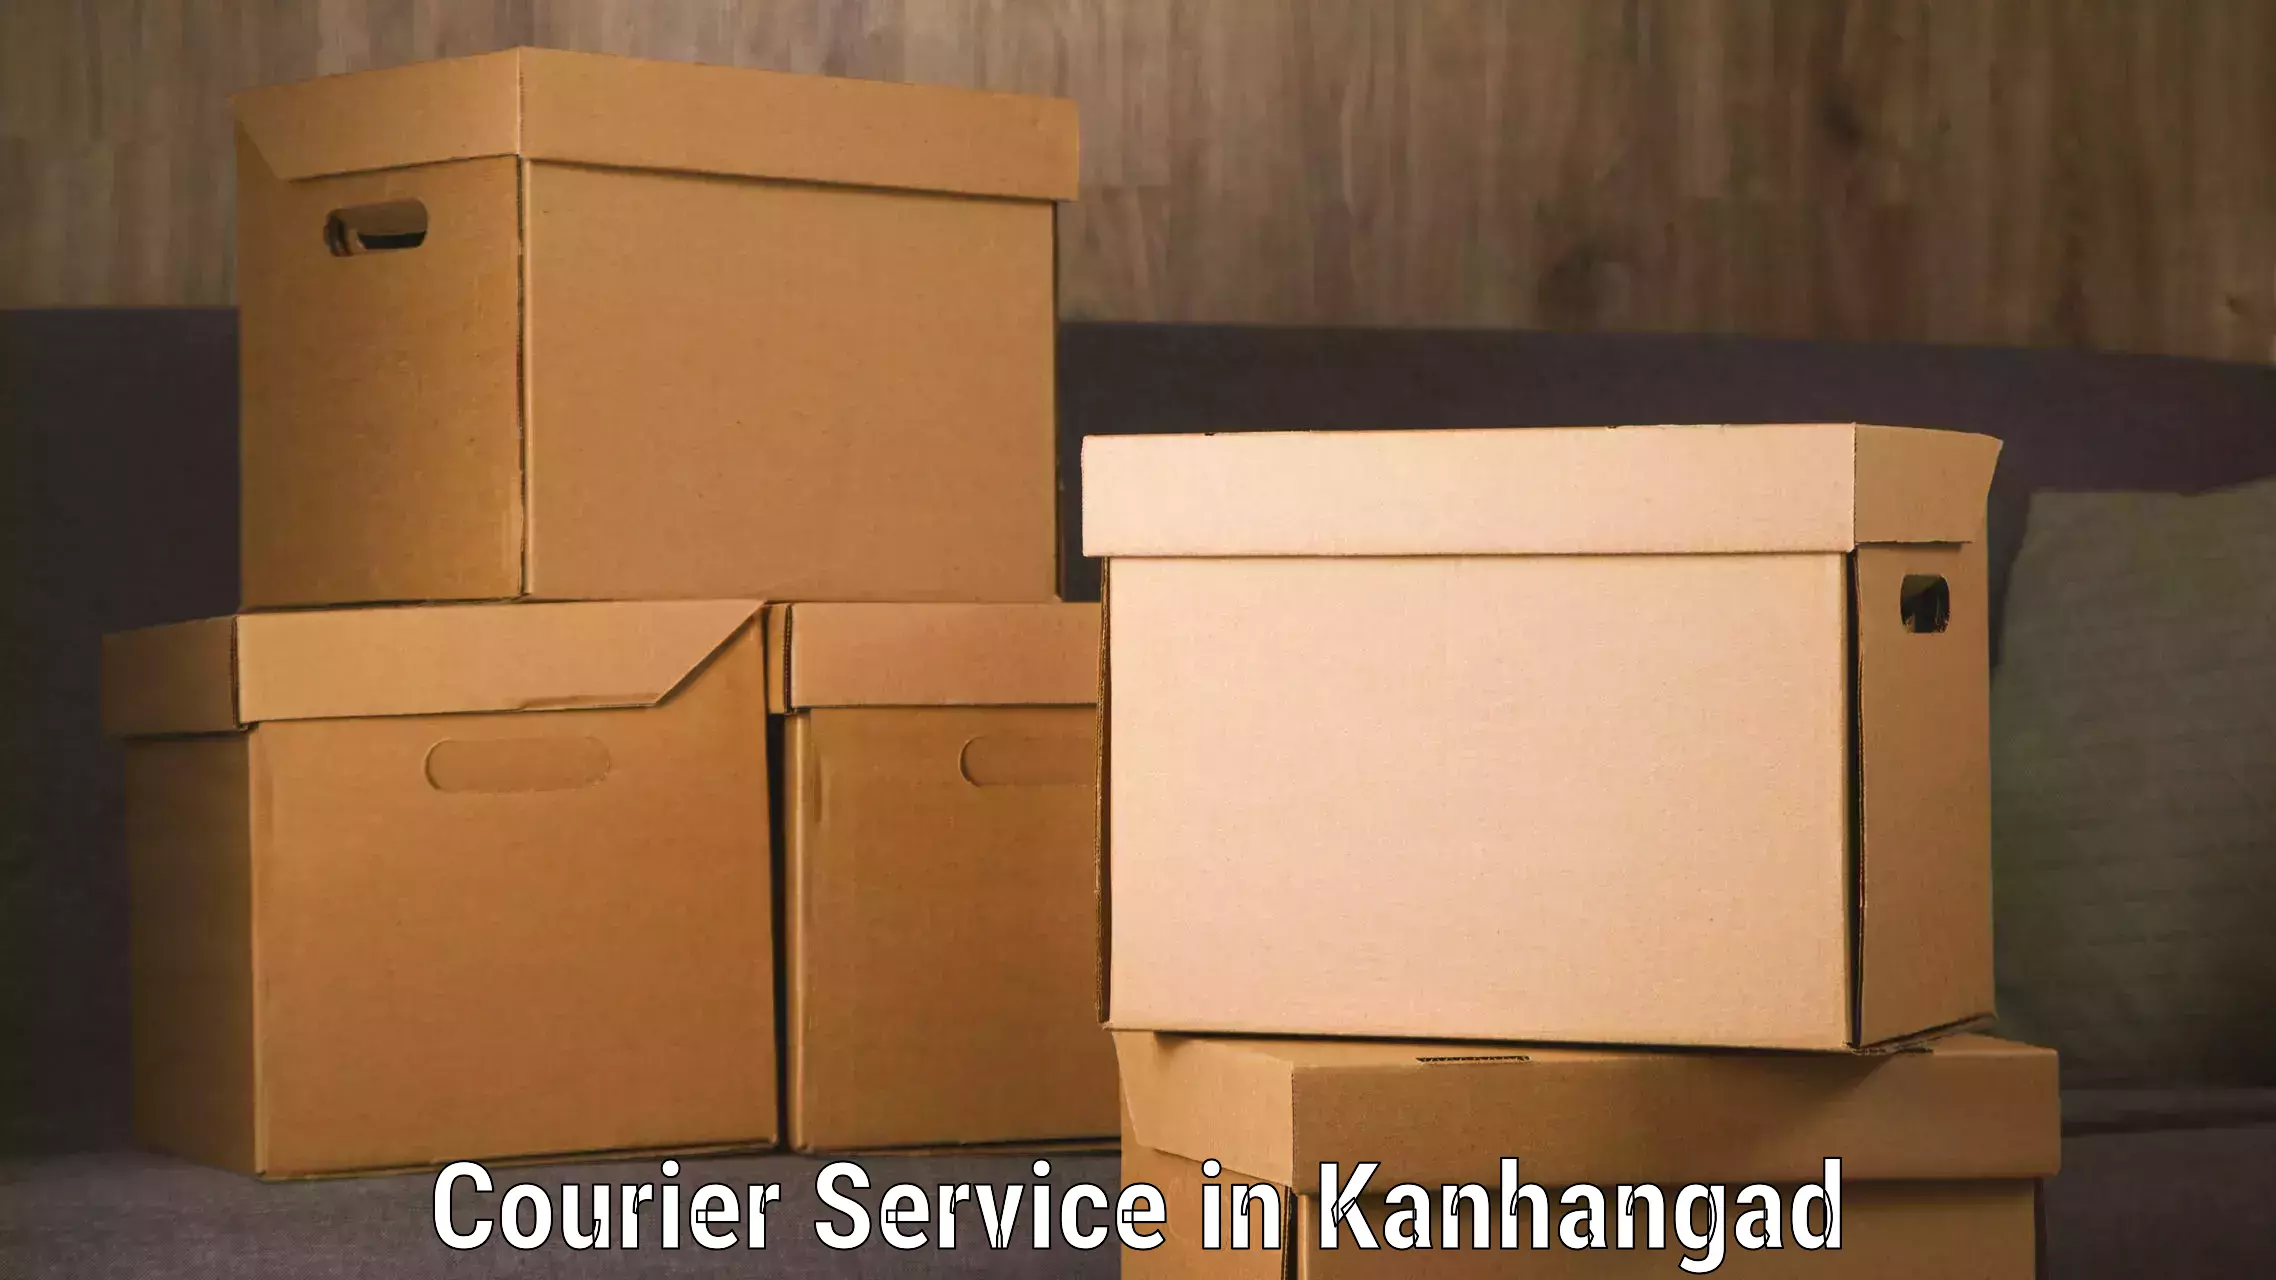 Courier services in Kanhangad